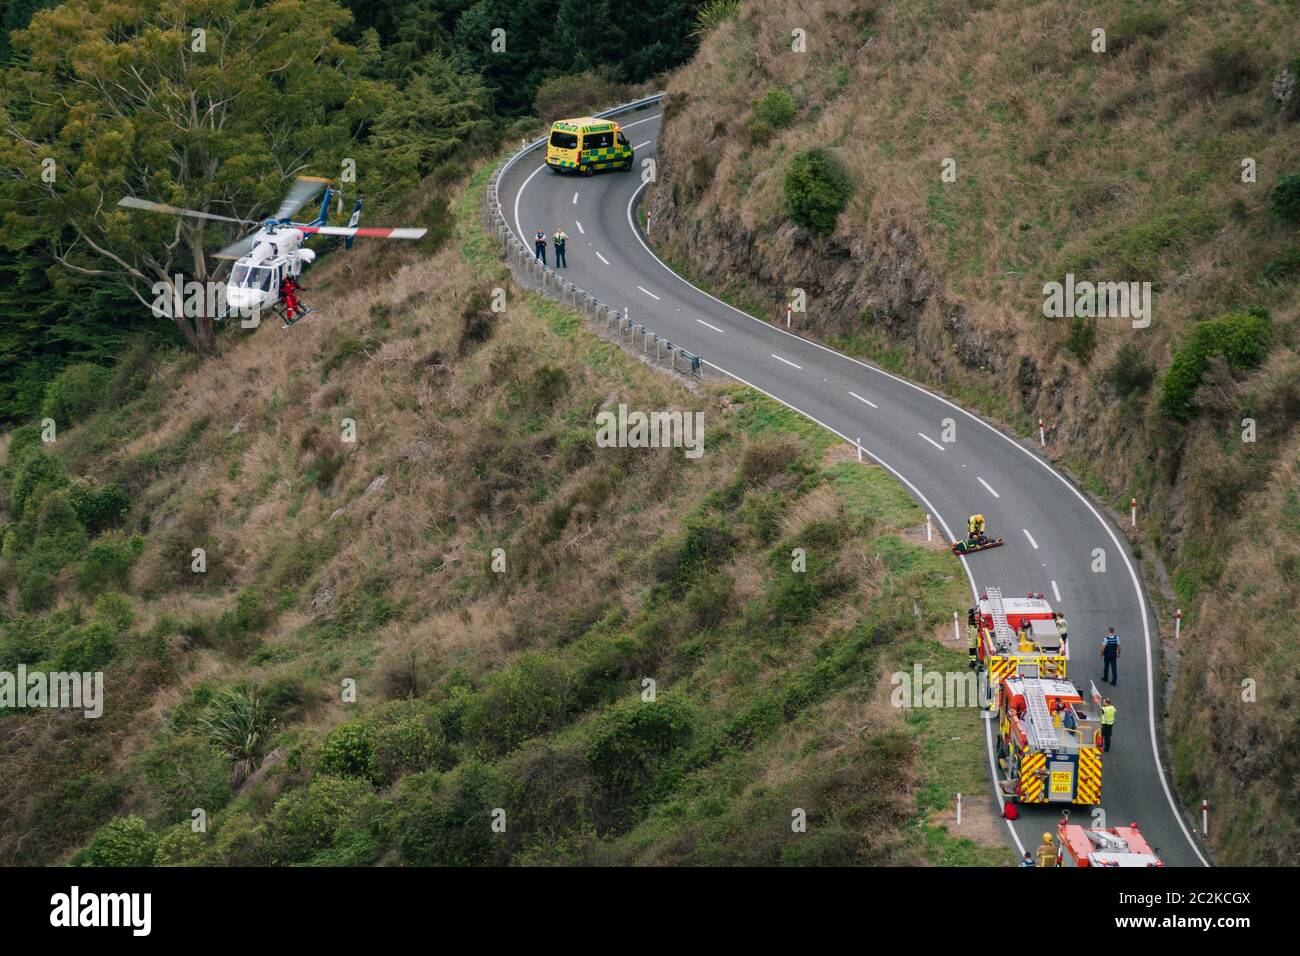 A rescue helicopter hovers over the scene of a motor vehicle accident on a hillside in Banks Peninsula, New Zealand Stock Photo